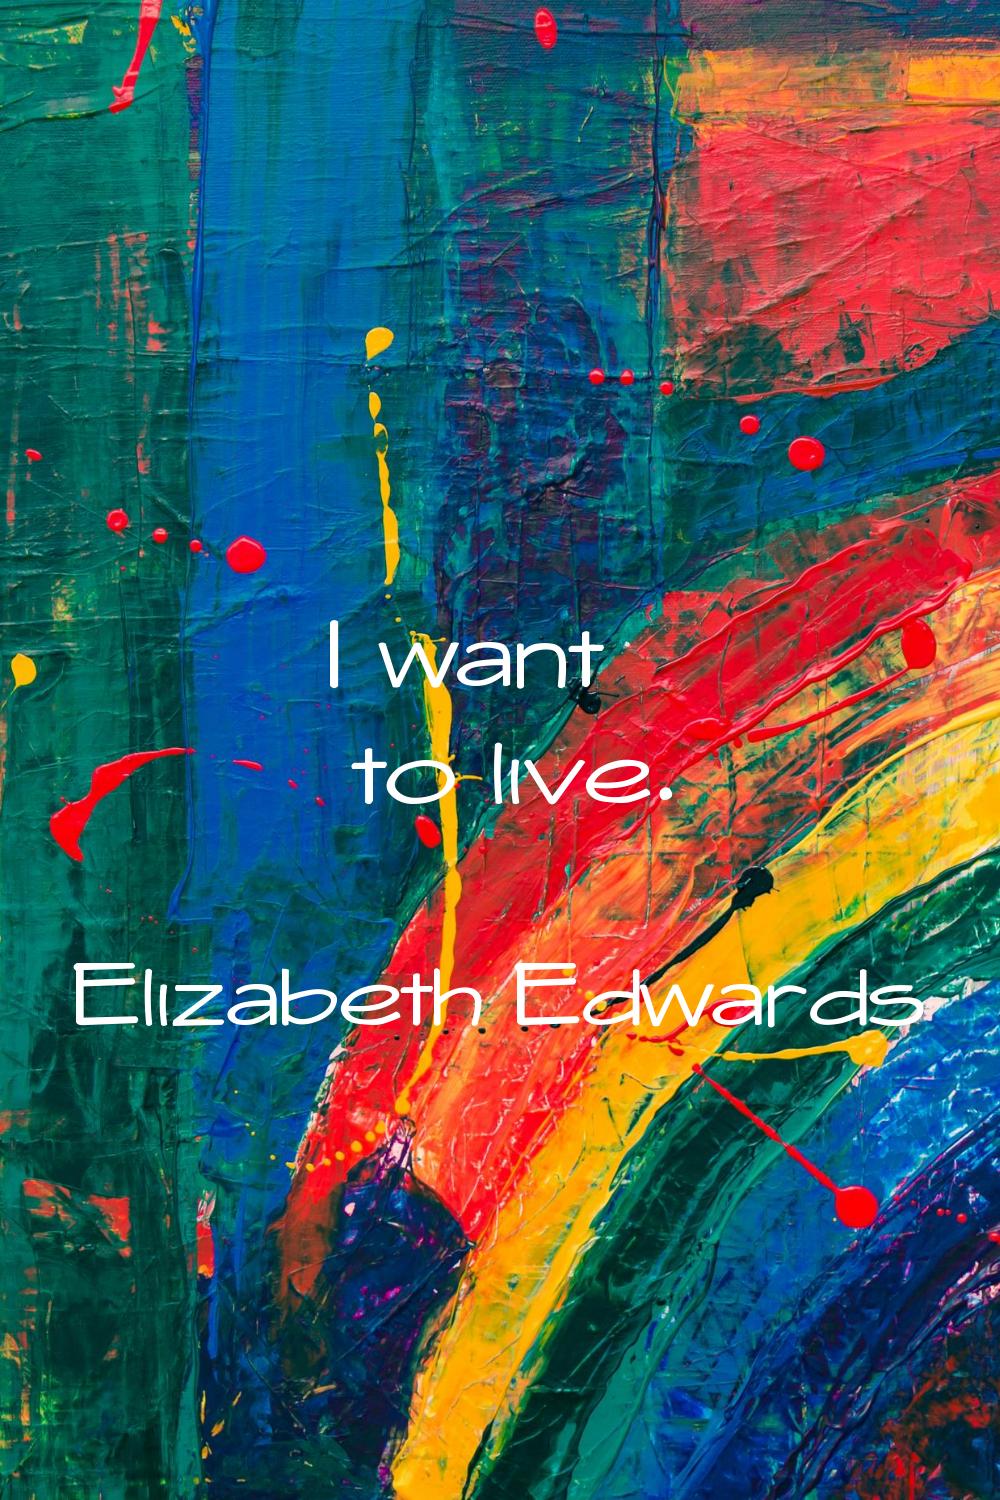 I want to live.